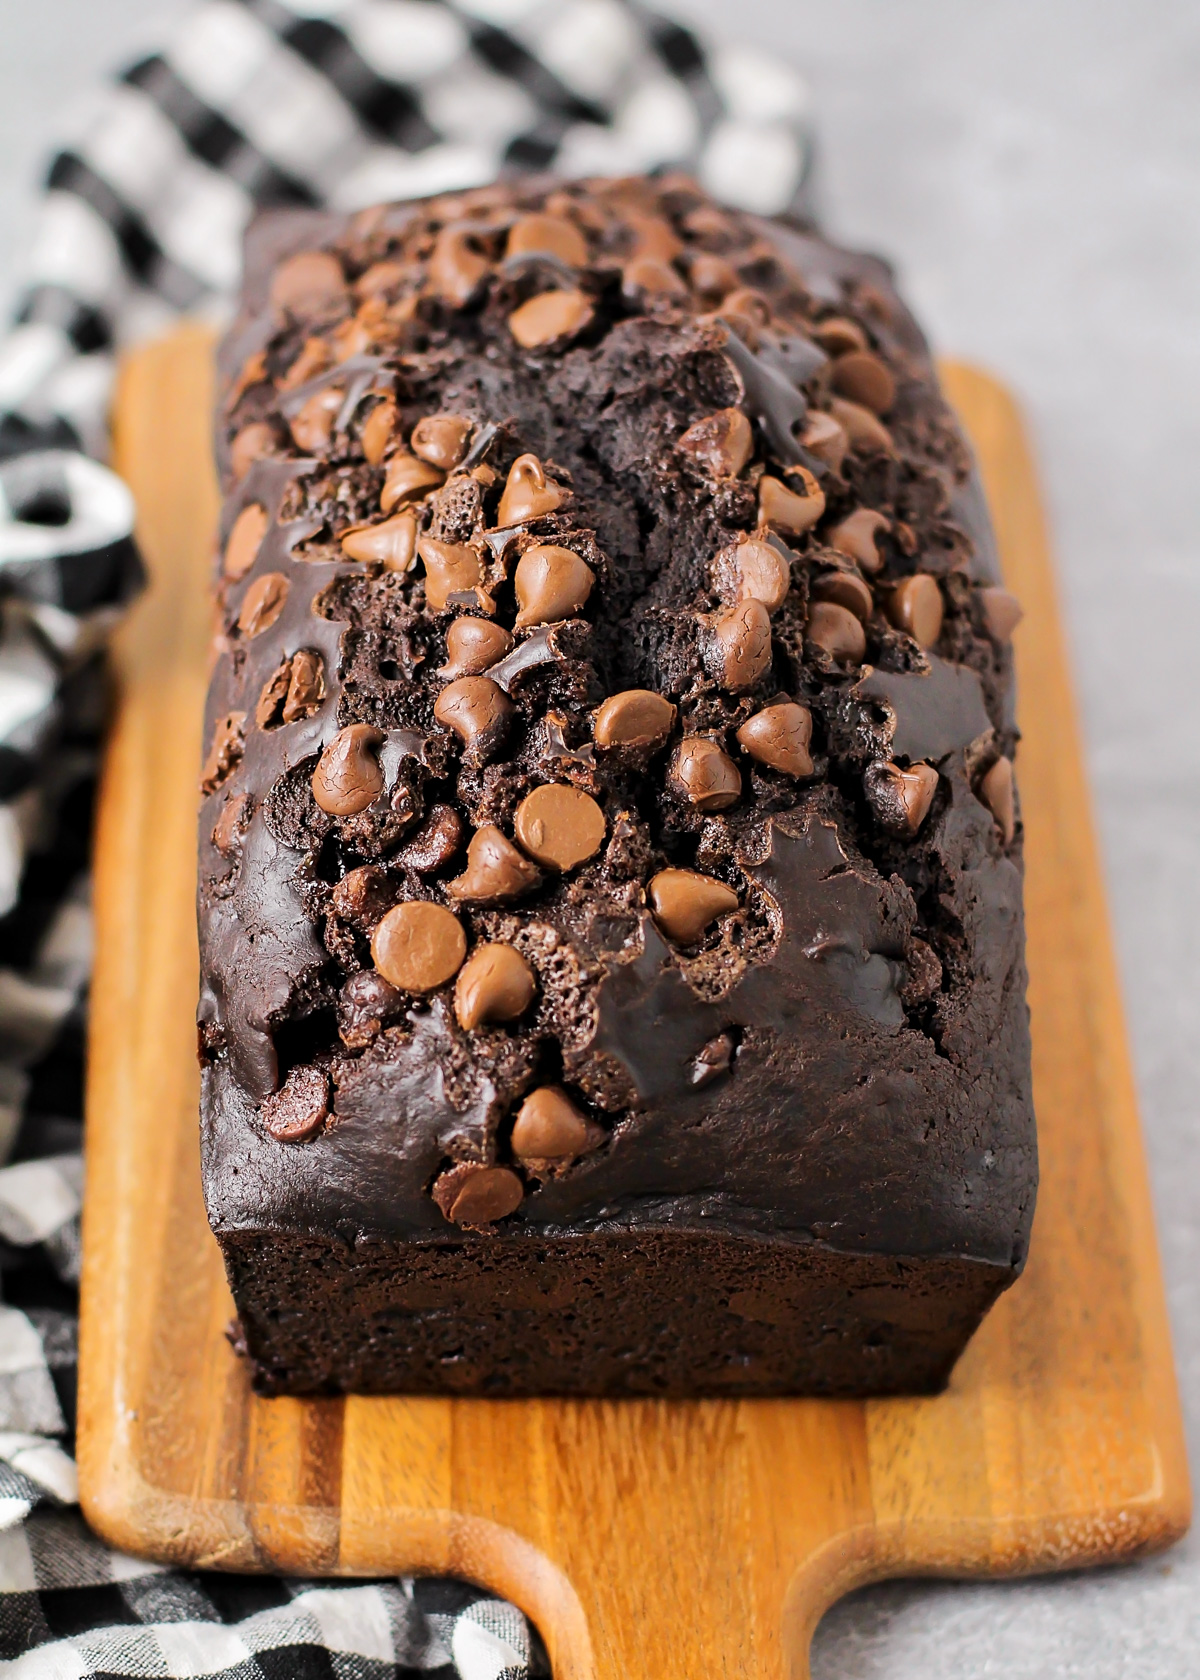 A loaf of chocolate bread on a cutting board.